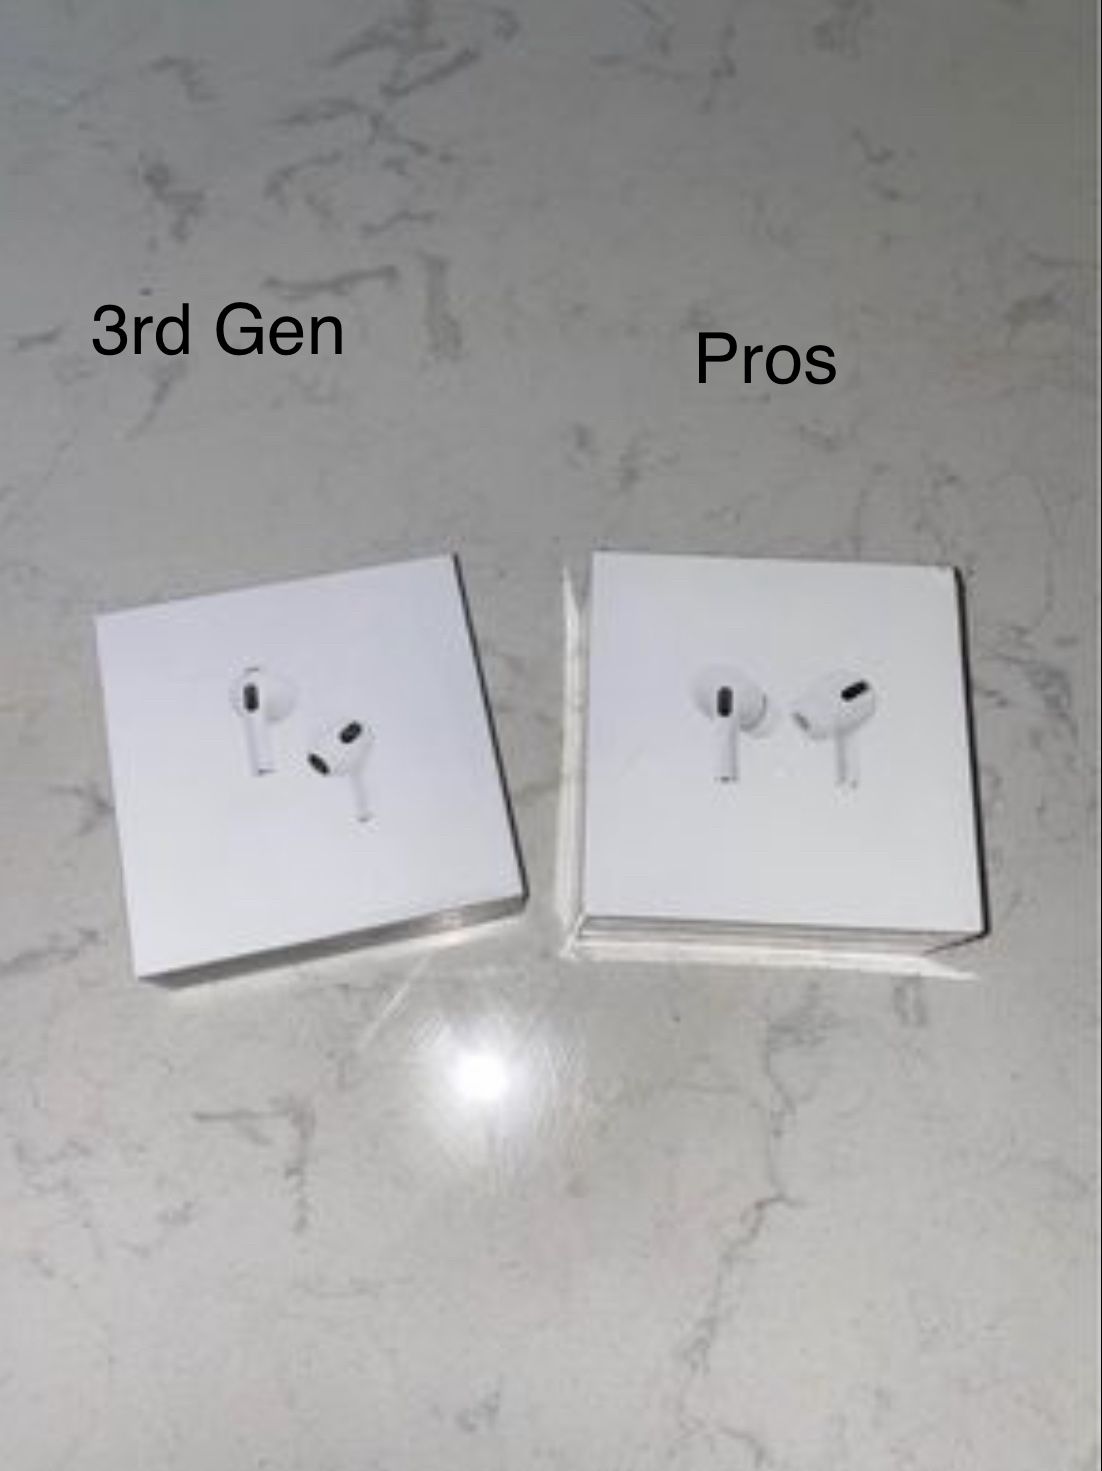 Apple AirPods 3rd Gen and Pros